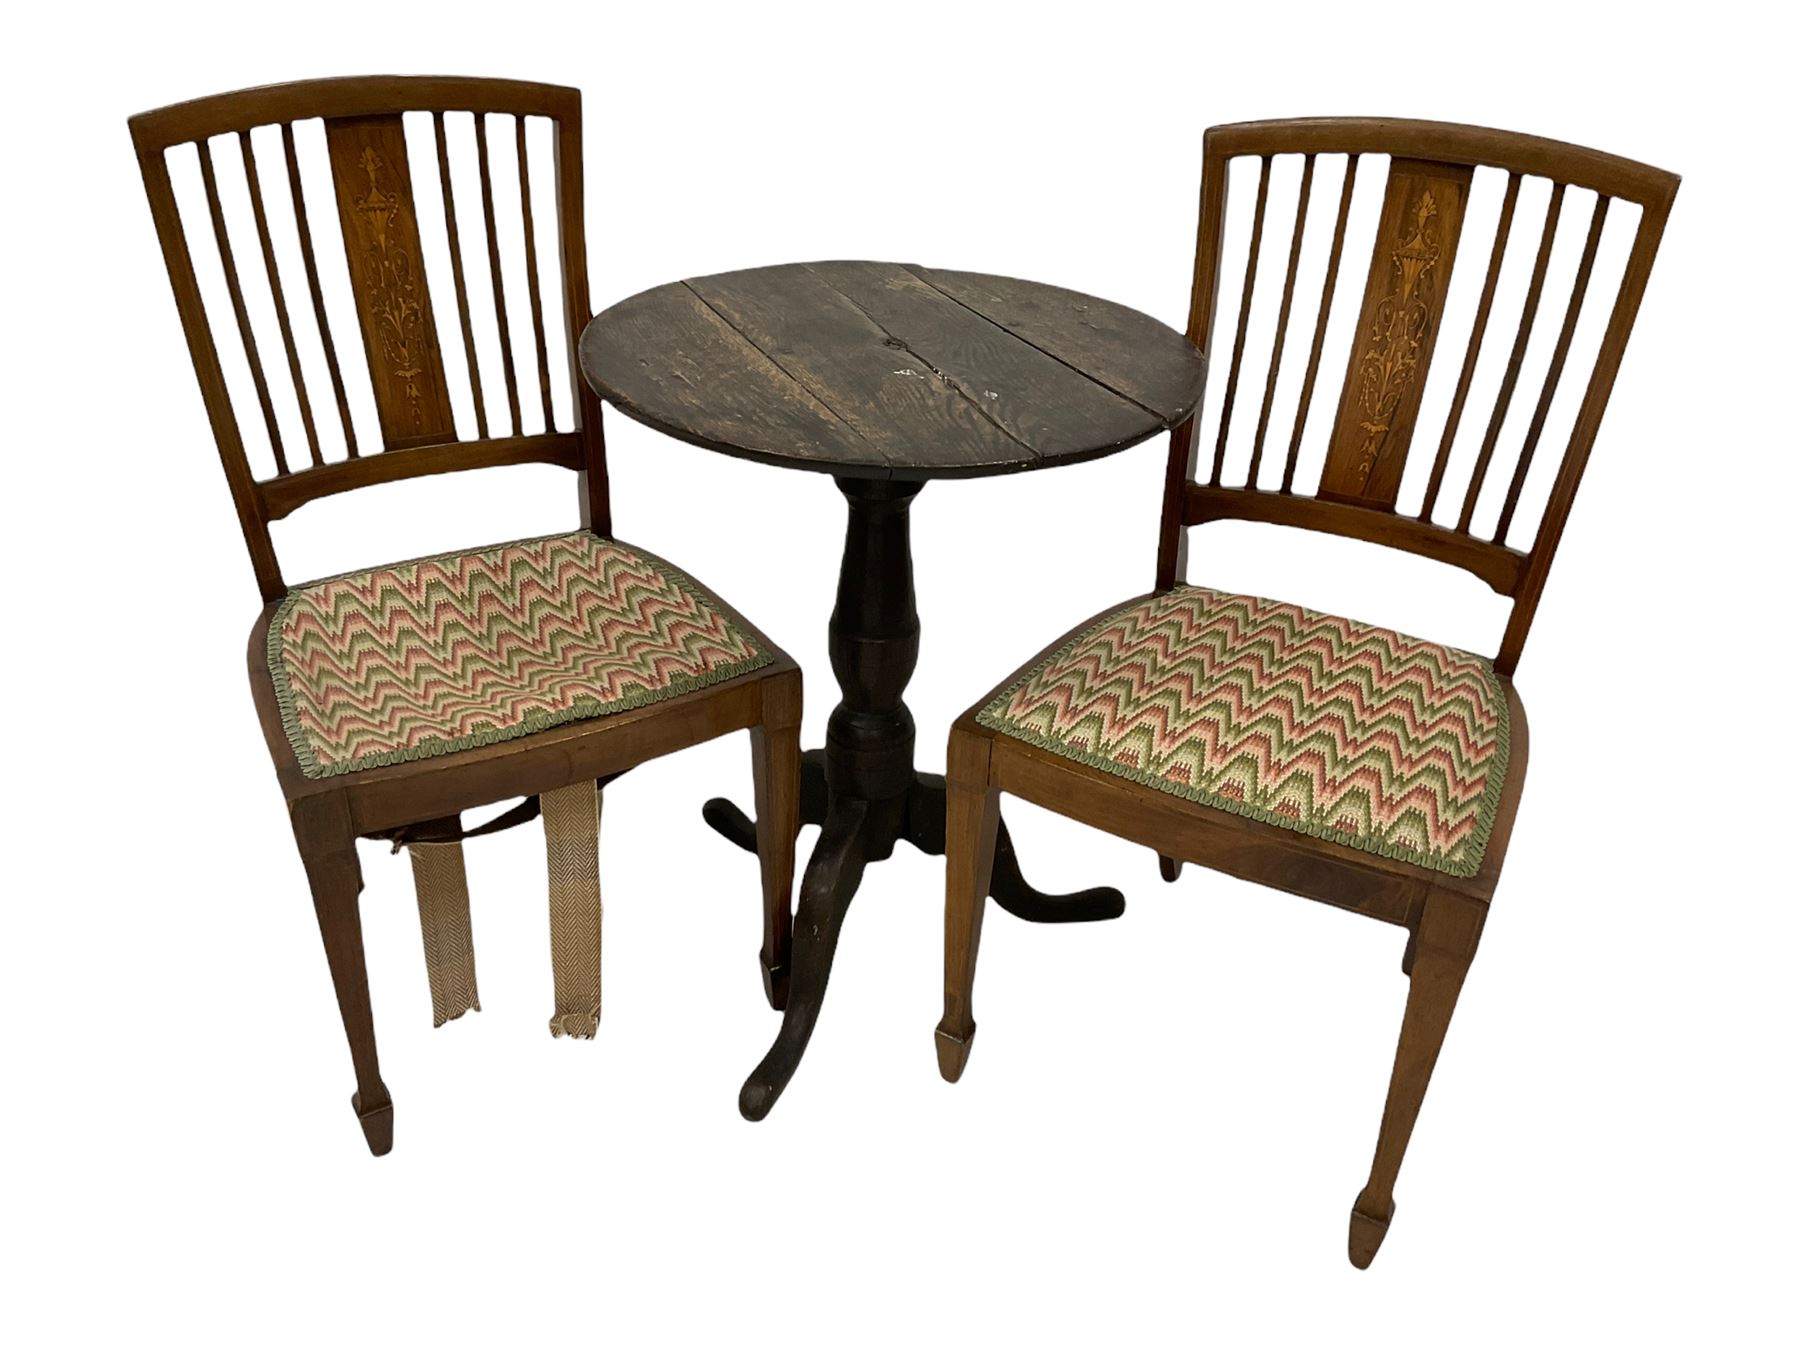 Pair of Edwardian rosewood chairs